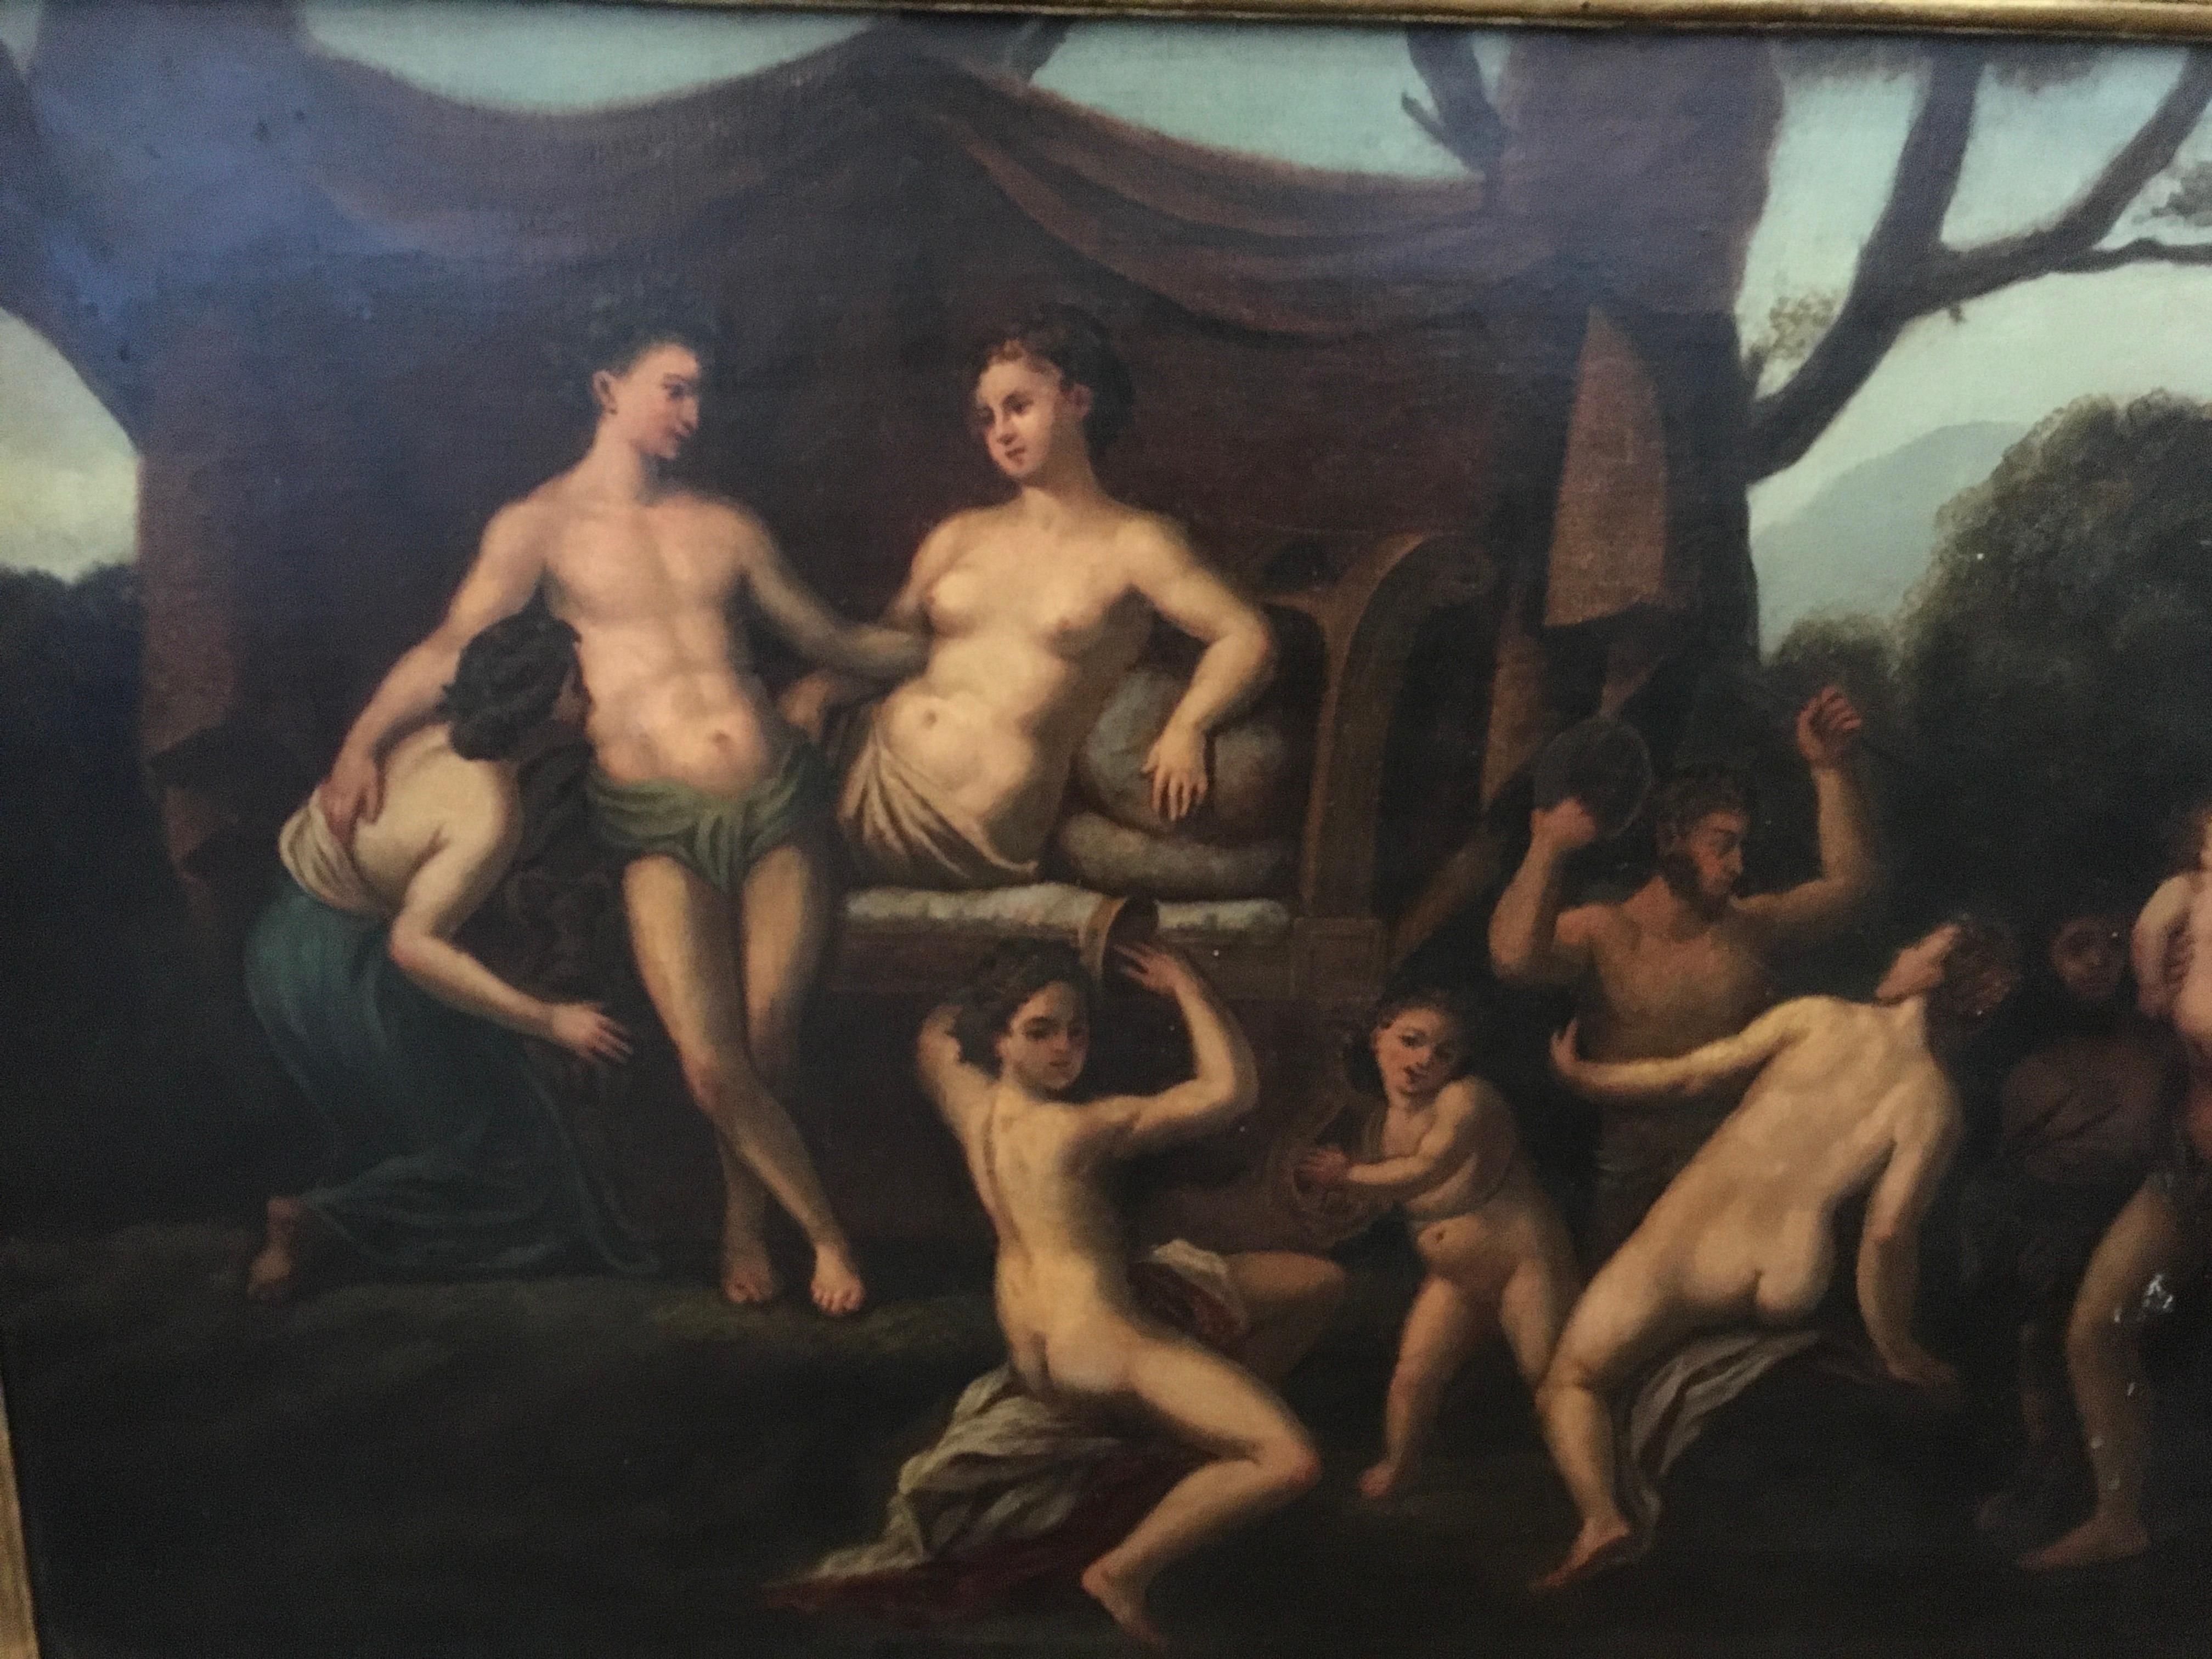 Late 18th Century Italian Baroque Allegorical Mythical Nudes “Virtue of Vice” - Painting by Unknown